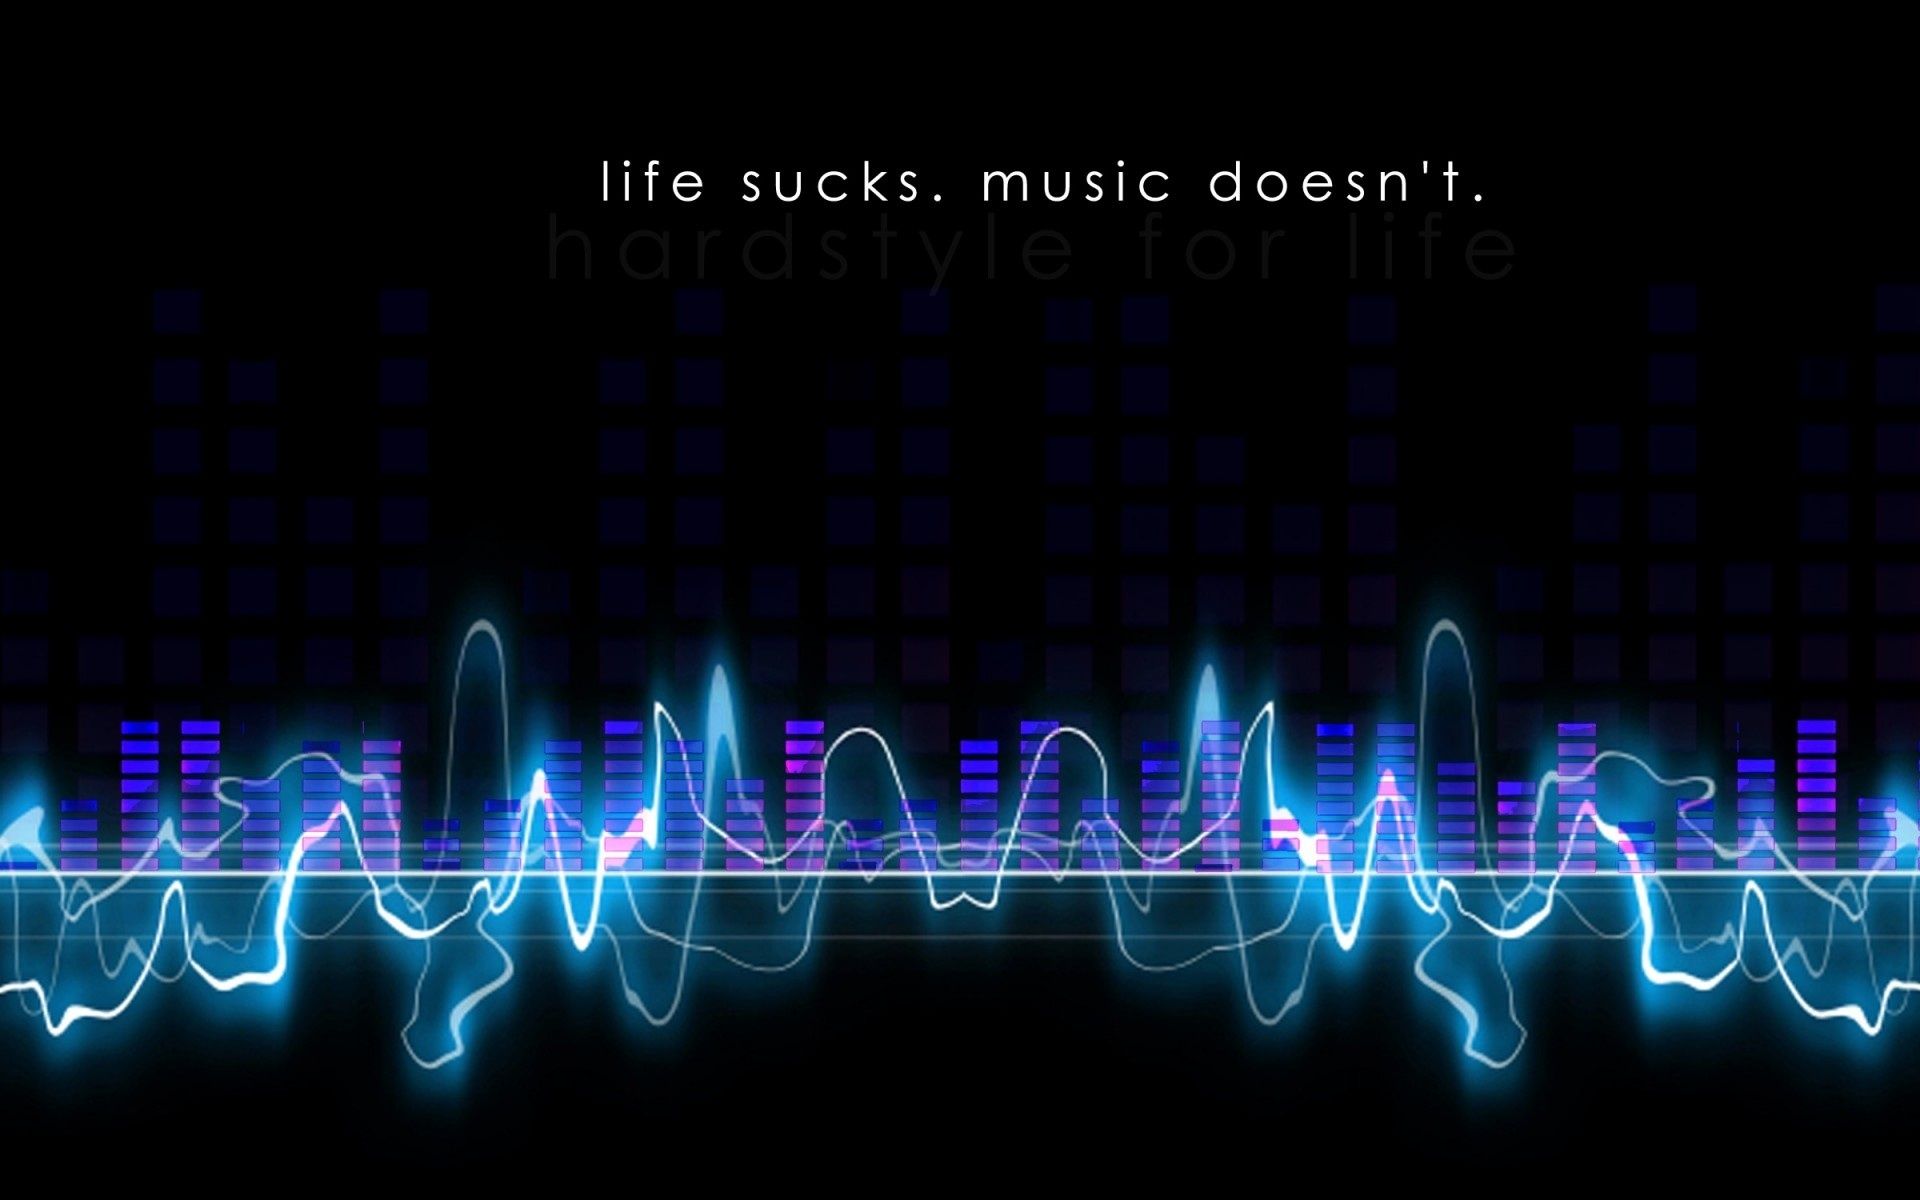 Equalizer Waveform Frequency Pulse Technology Intensity - Abstract Music  Background - 1920x1200 Wallpaper 